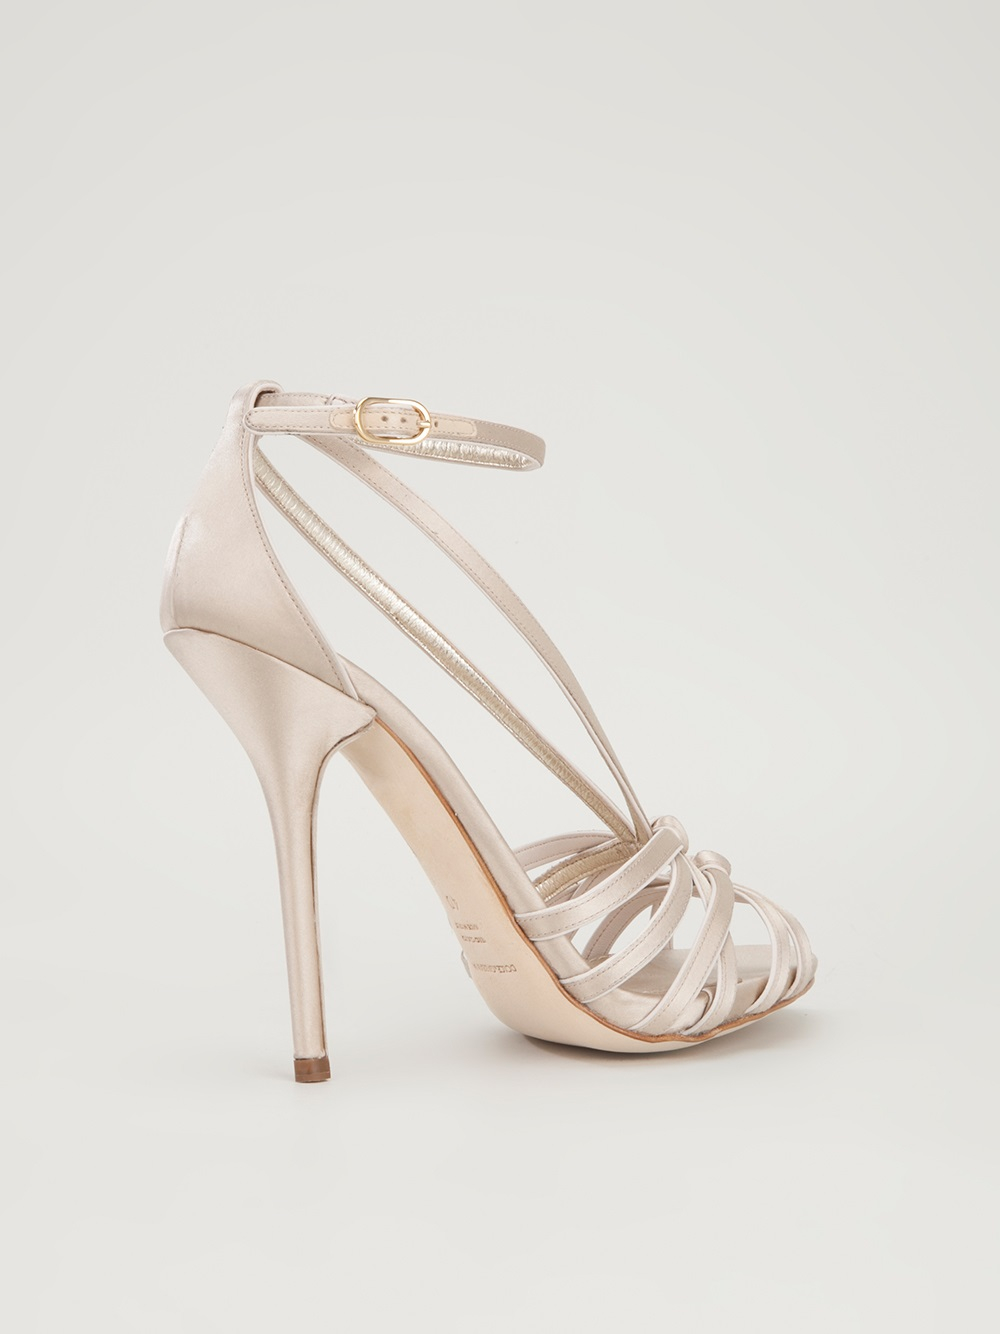 Lyst - Dolce & Gabbana Strappy Heeled Sandals in Natural